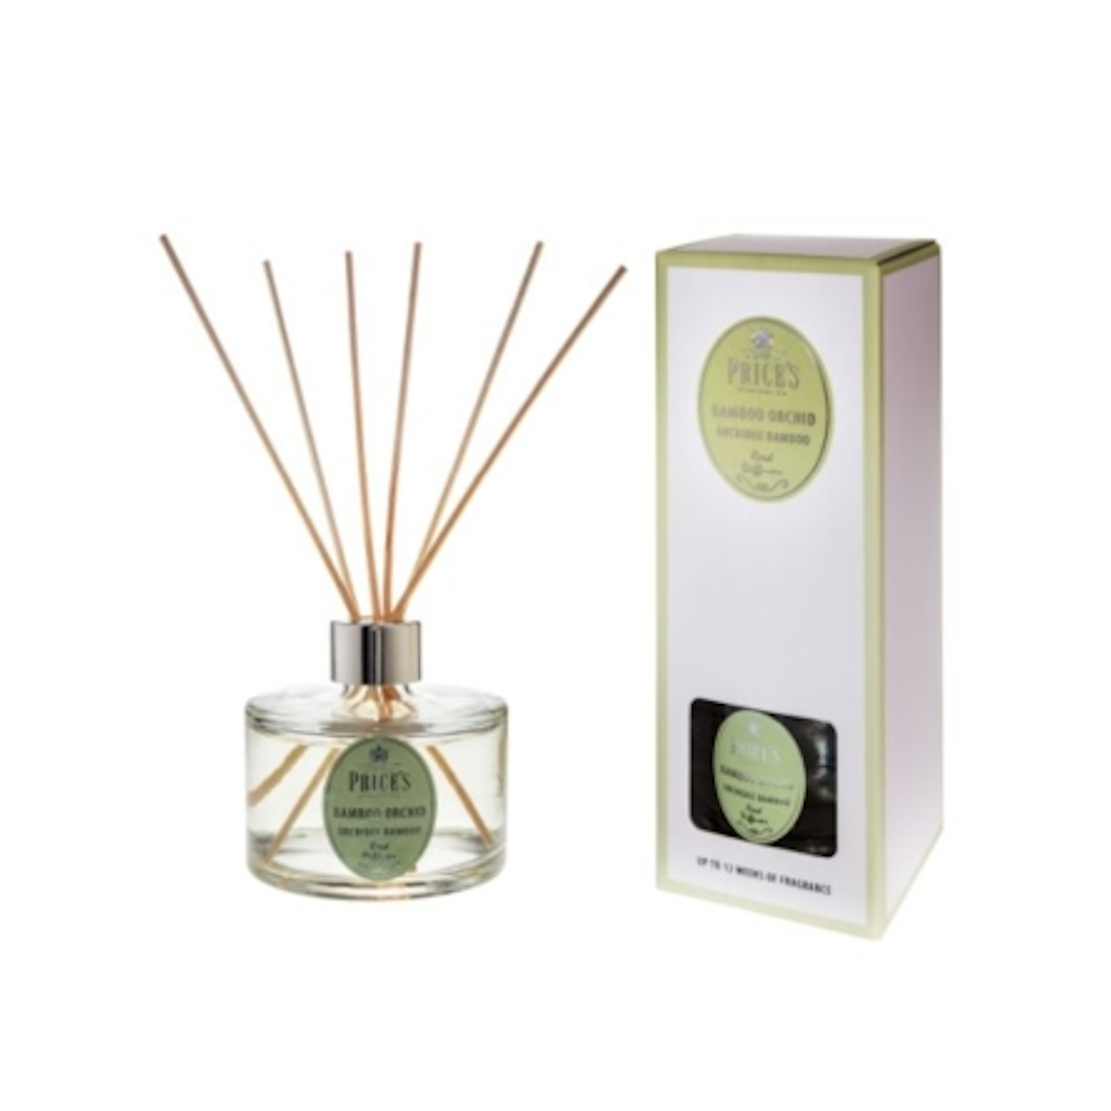 Prices Candles Bamboo Orchid 250ml Reed Diffuser